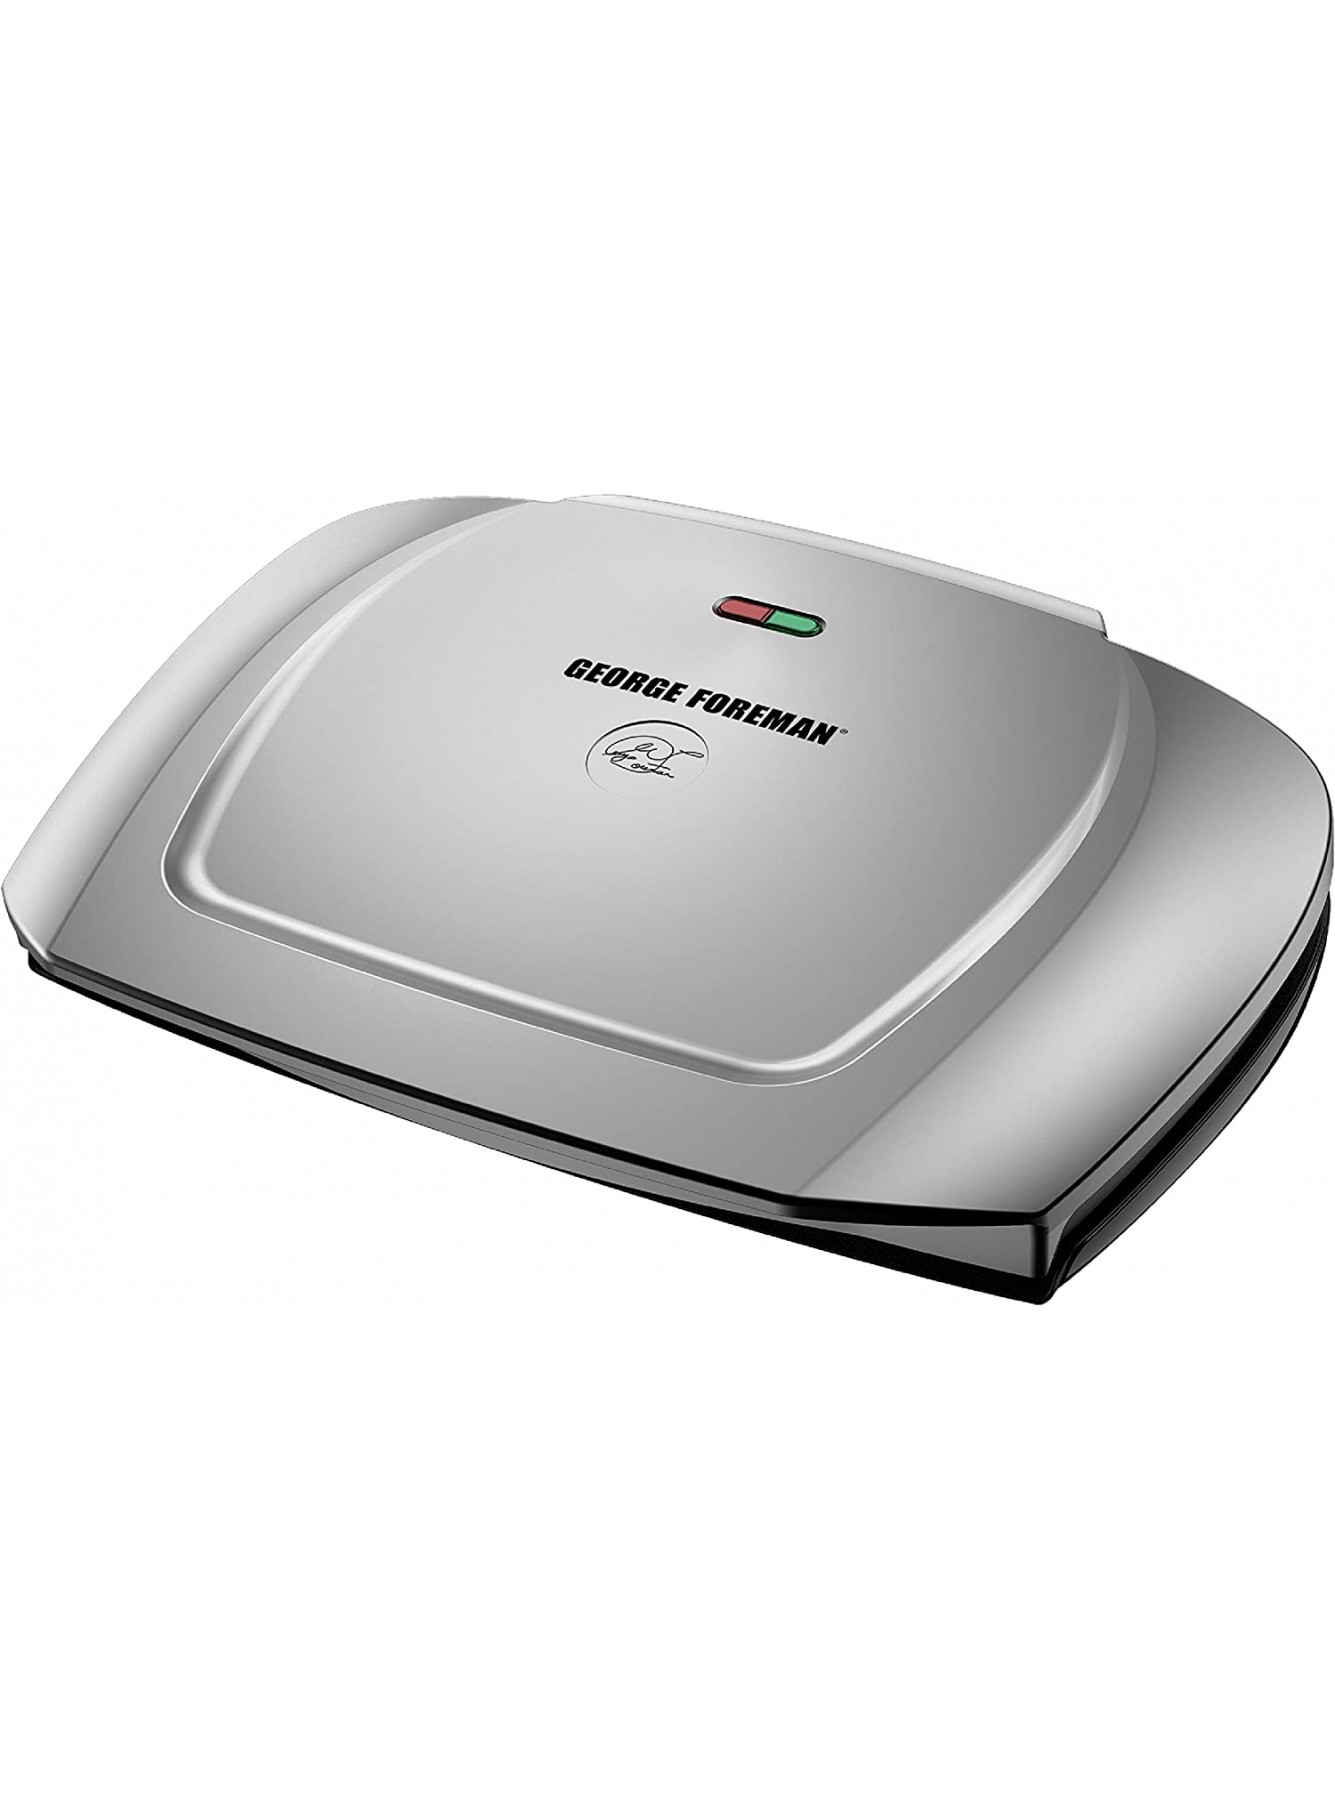 George Foreman 9-Serving Basic Plate Electric Grill and Panini Press 144-Square-Inch Platinum GR2144P B00CI51TO6